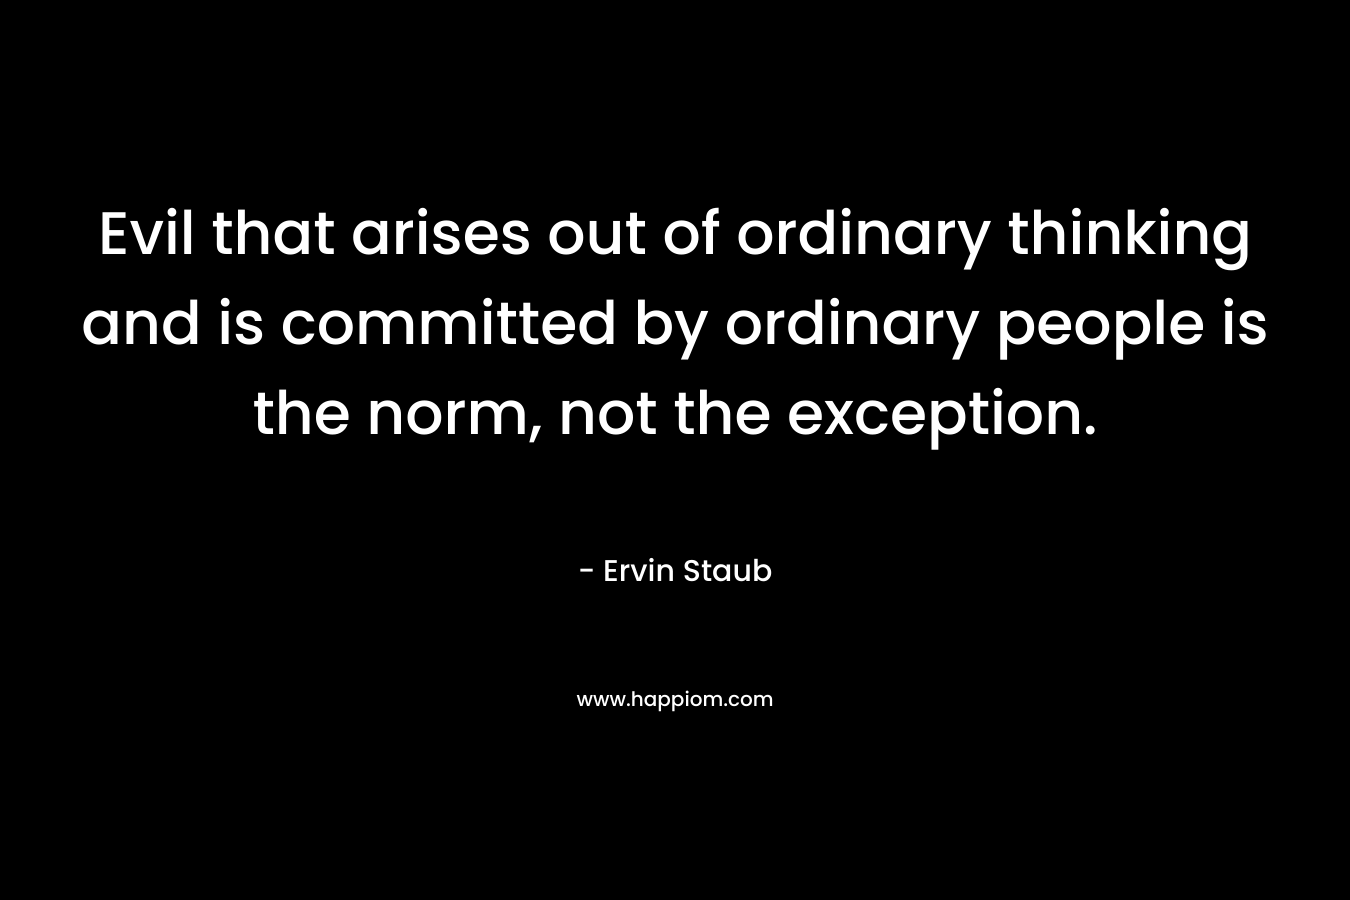 Evil that arises out of ordinary thinking and is committed by ordinary people is the norm, not the exception.